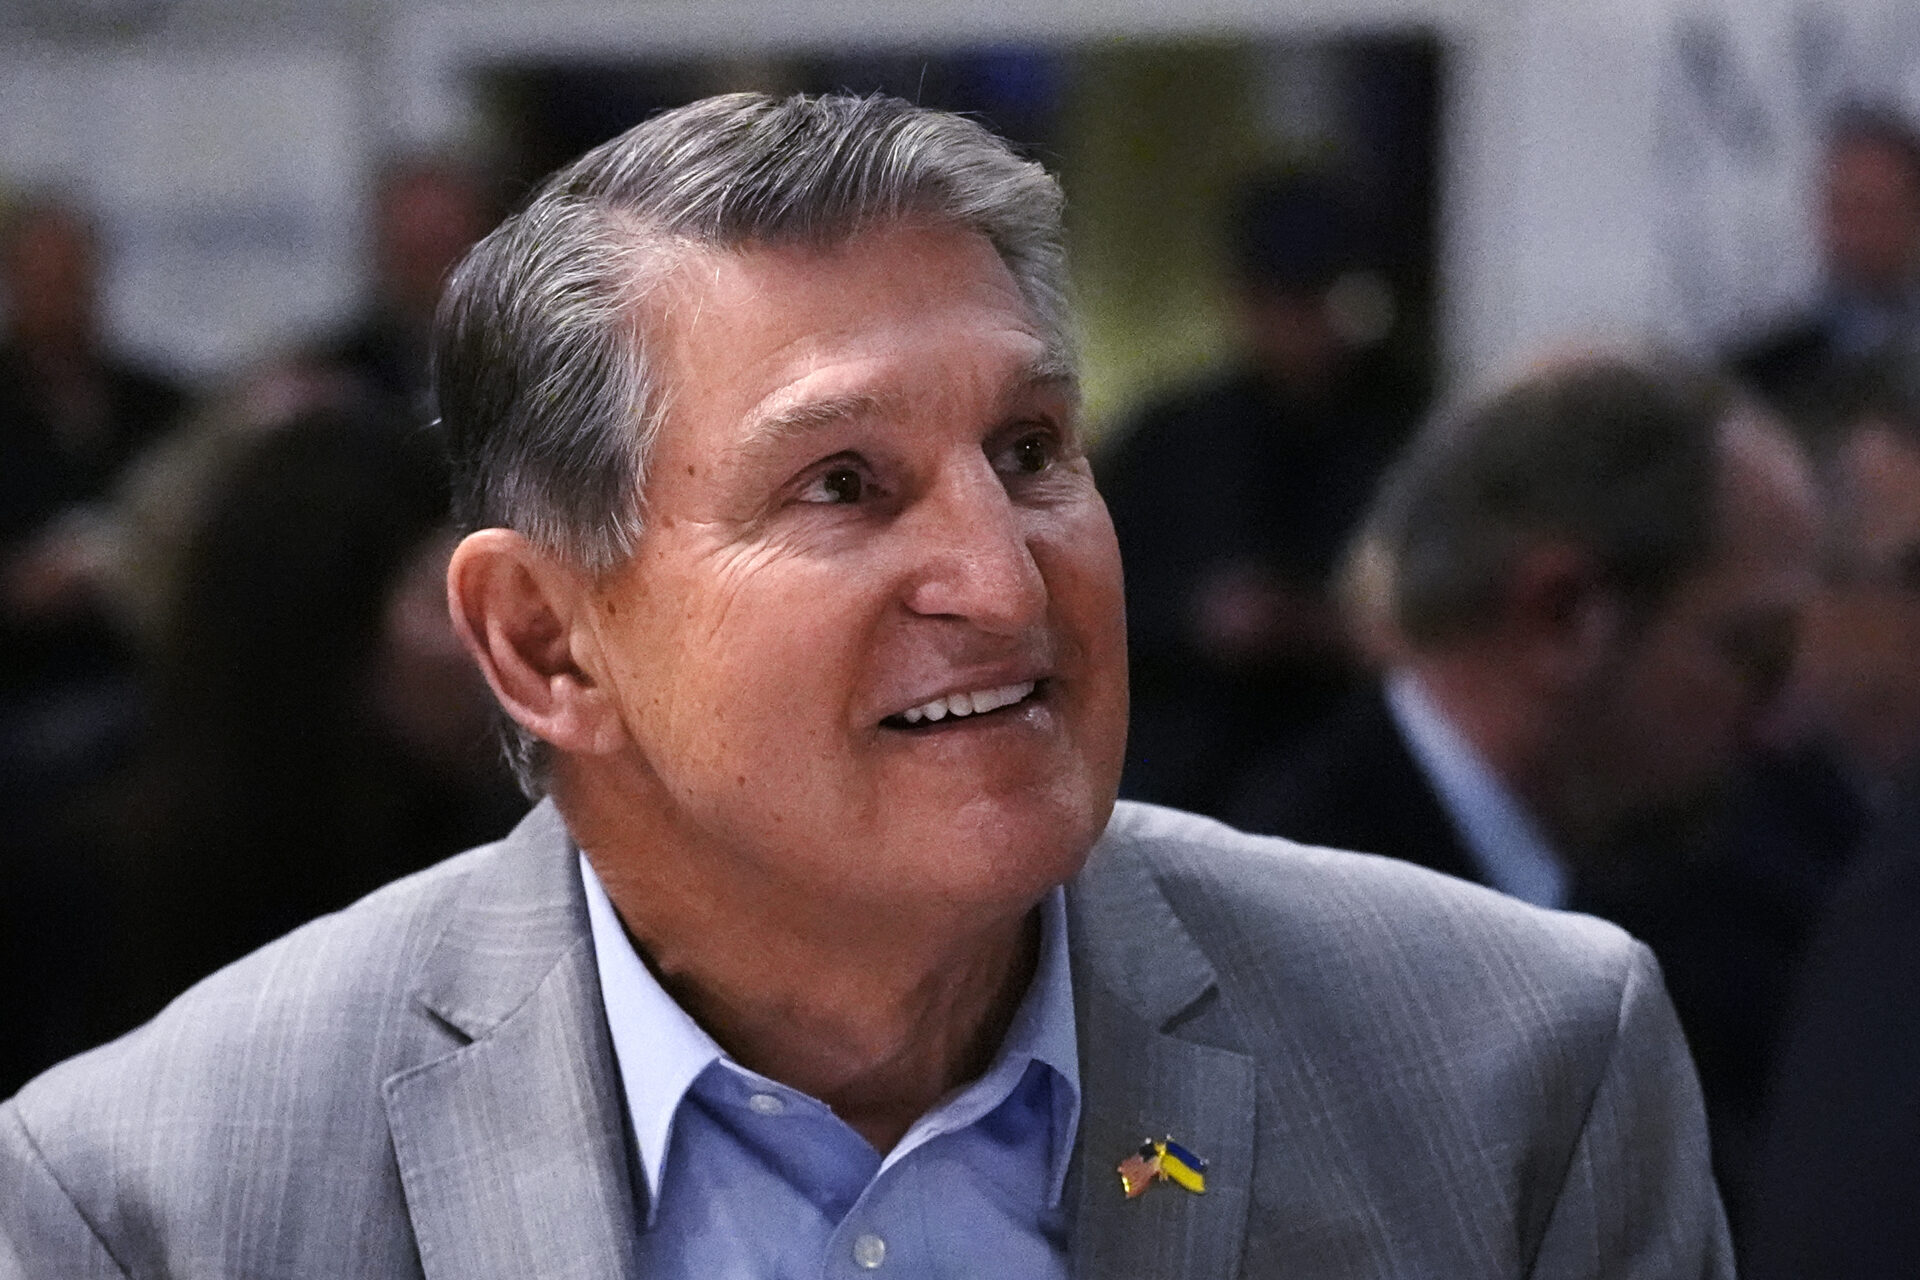 An older man with salt and pepper hair looks off camera smiling. He wears formal clothing.